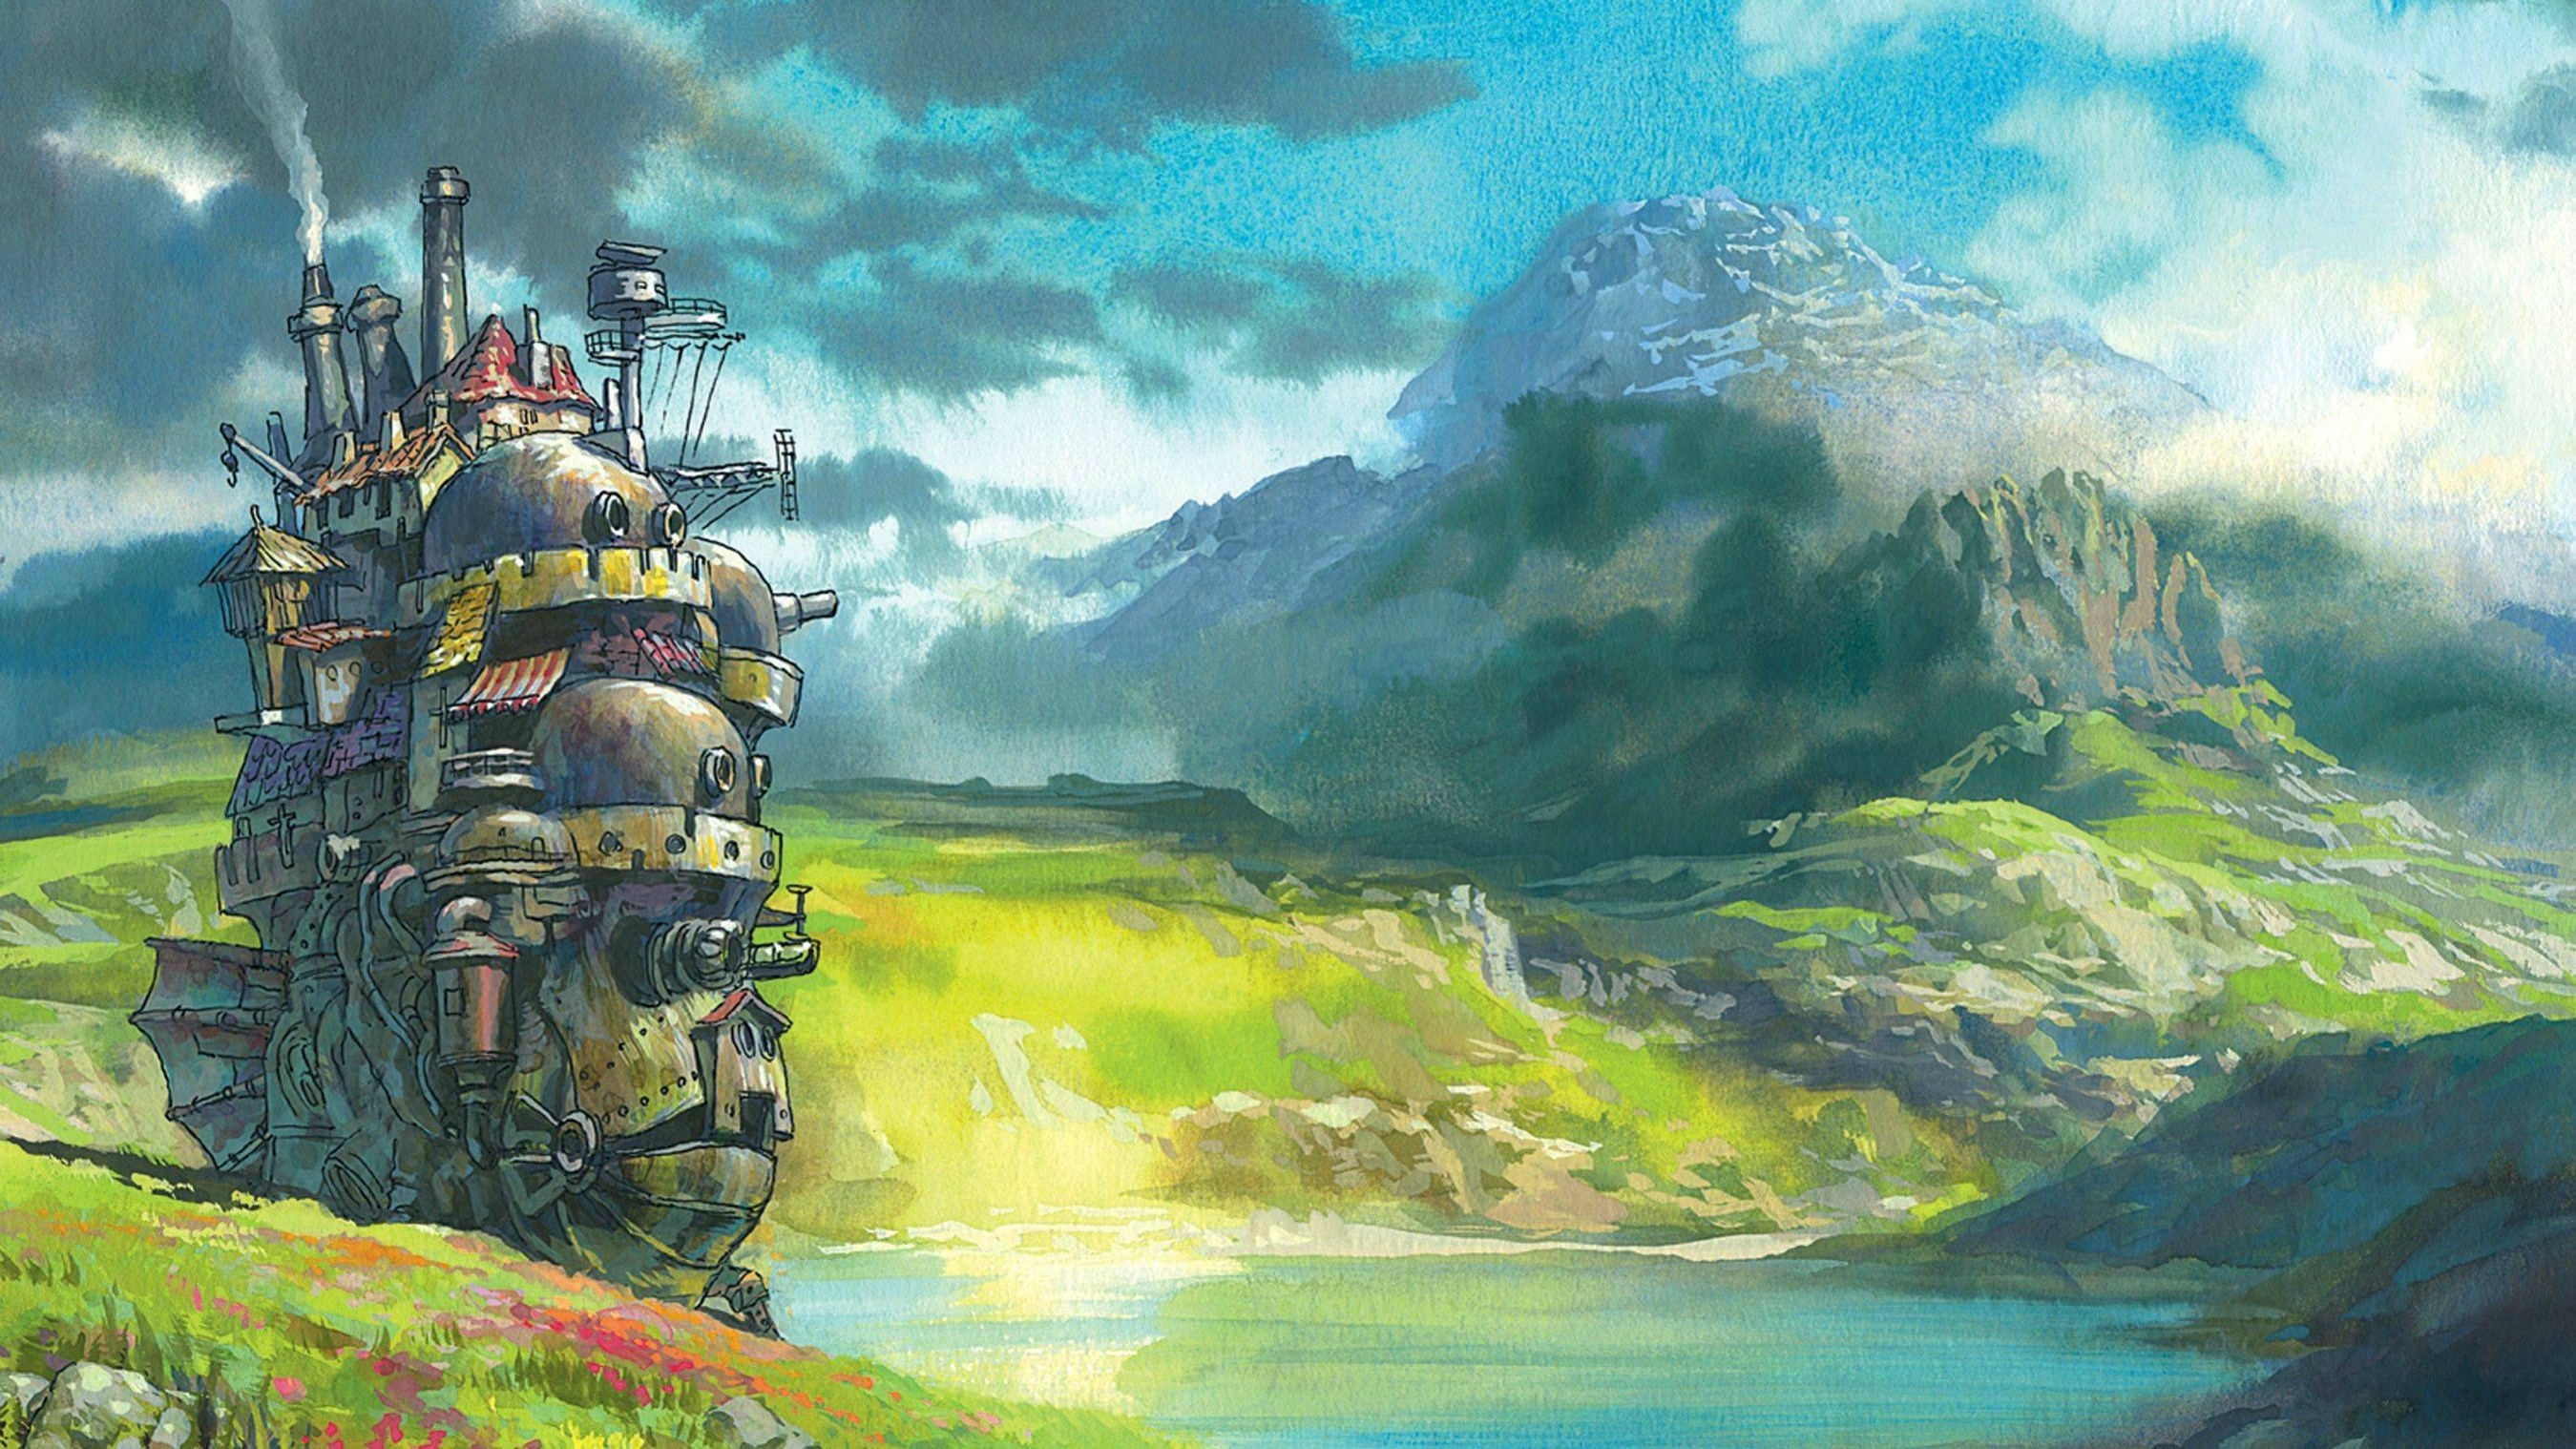 2699x1518 howls moving castle, I still can't believe the backgrounds are watercolor |  Concept Art _ Movie | Pinterest | Howls moving castle, Studio ghibli and ...